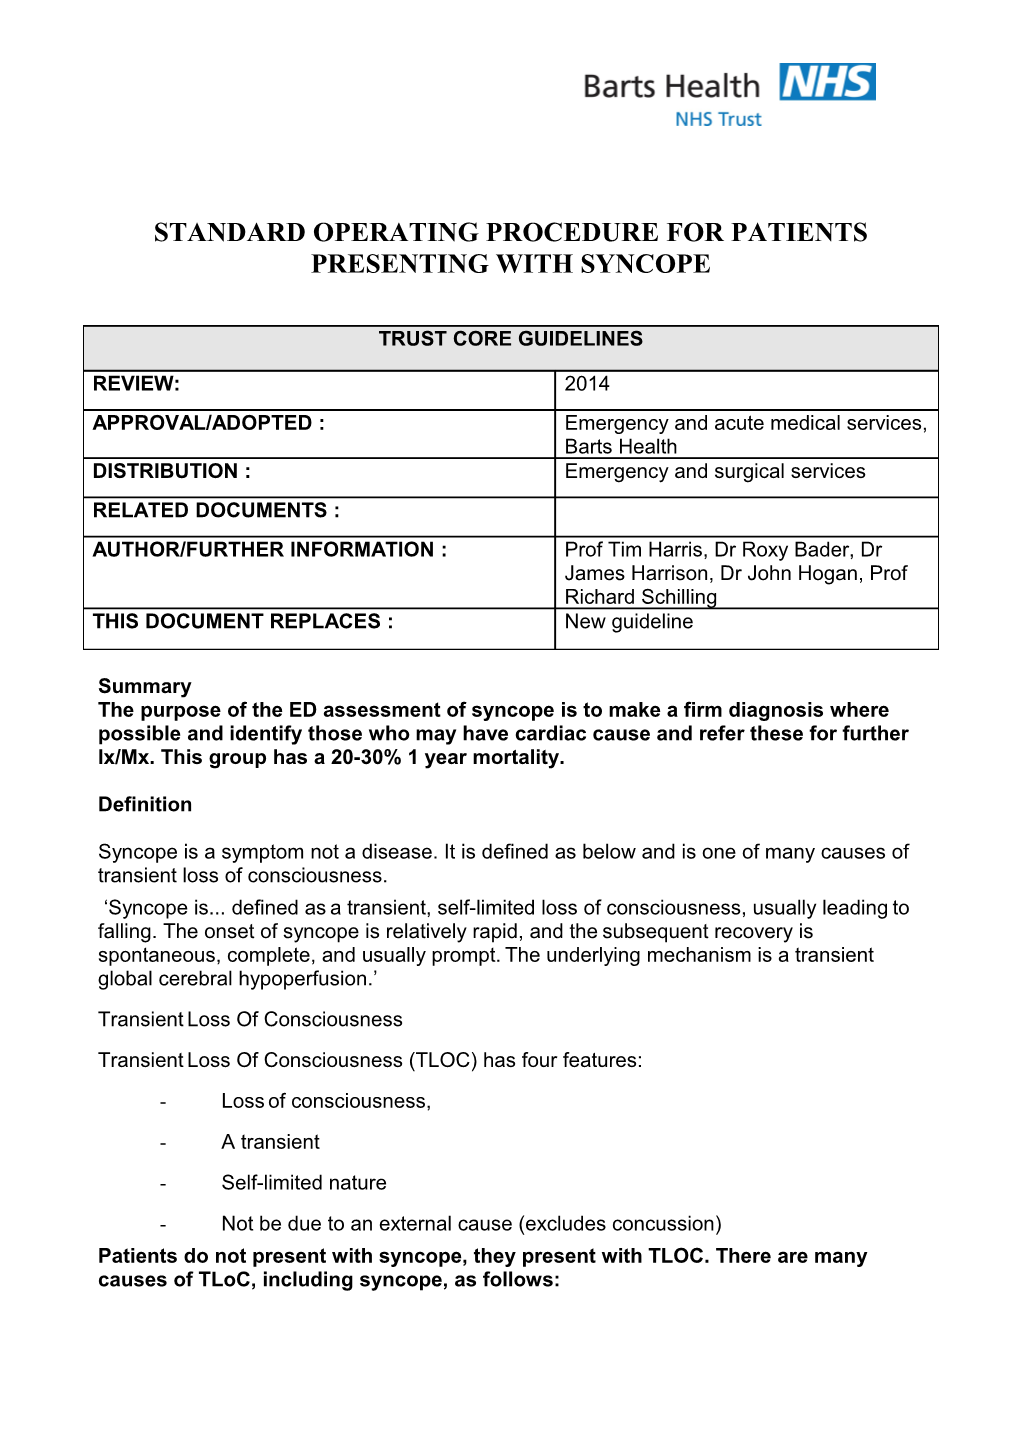 Standard Operating Procedure for Patients Presenting with Syncope